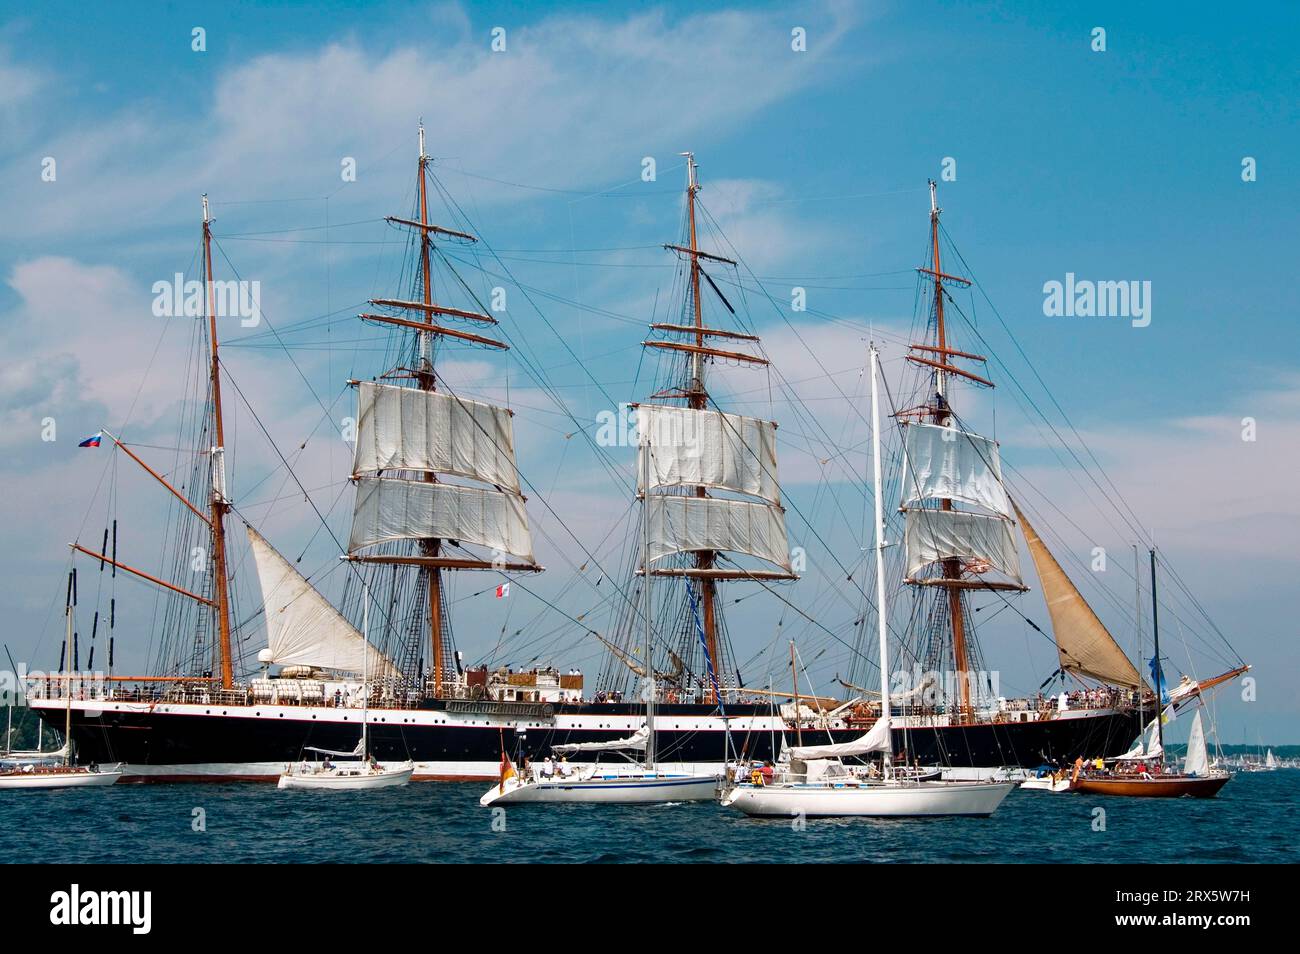 Parade of tall ships with the four-masted barque 'Sedov', Kiel Week, Bay of Kiel, Baltic Sea, Schleswig-Holstein, Germany Stock Photo